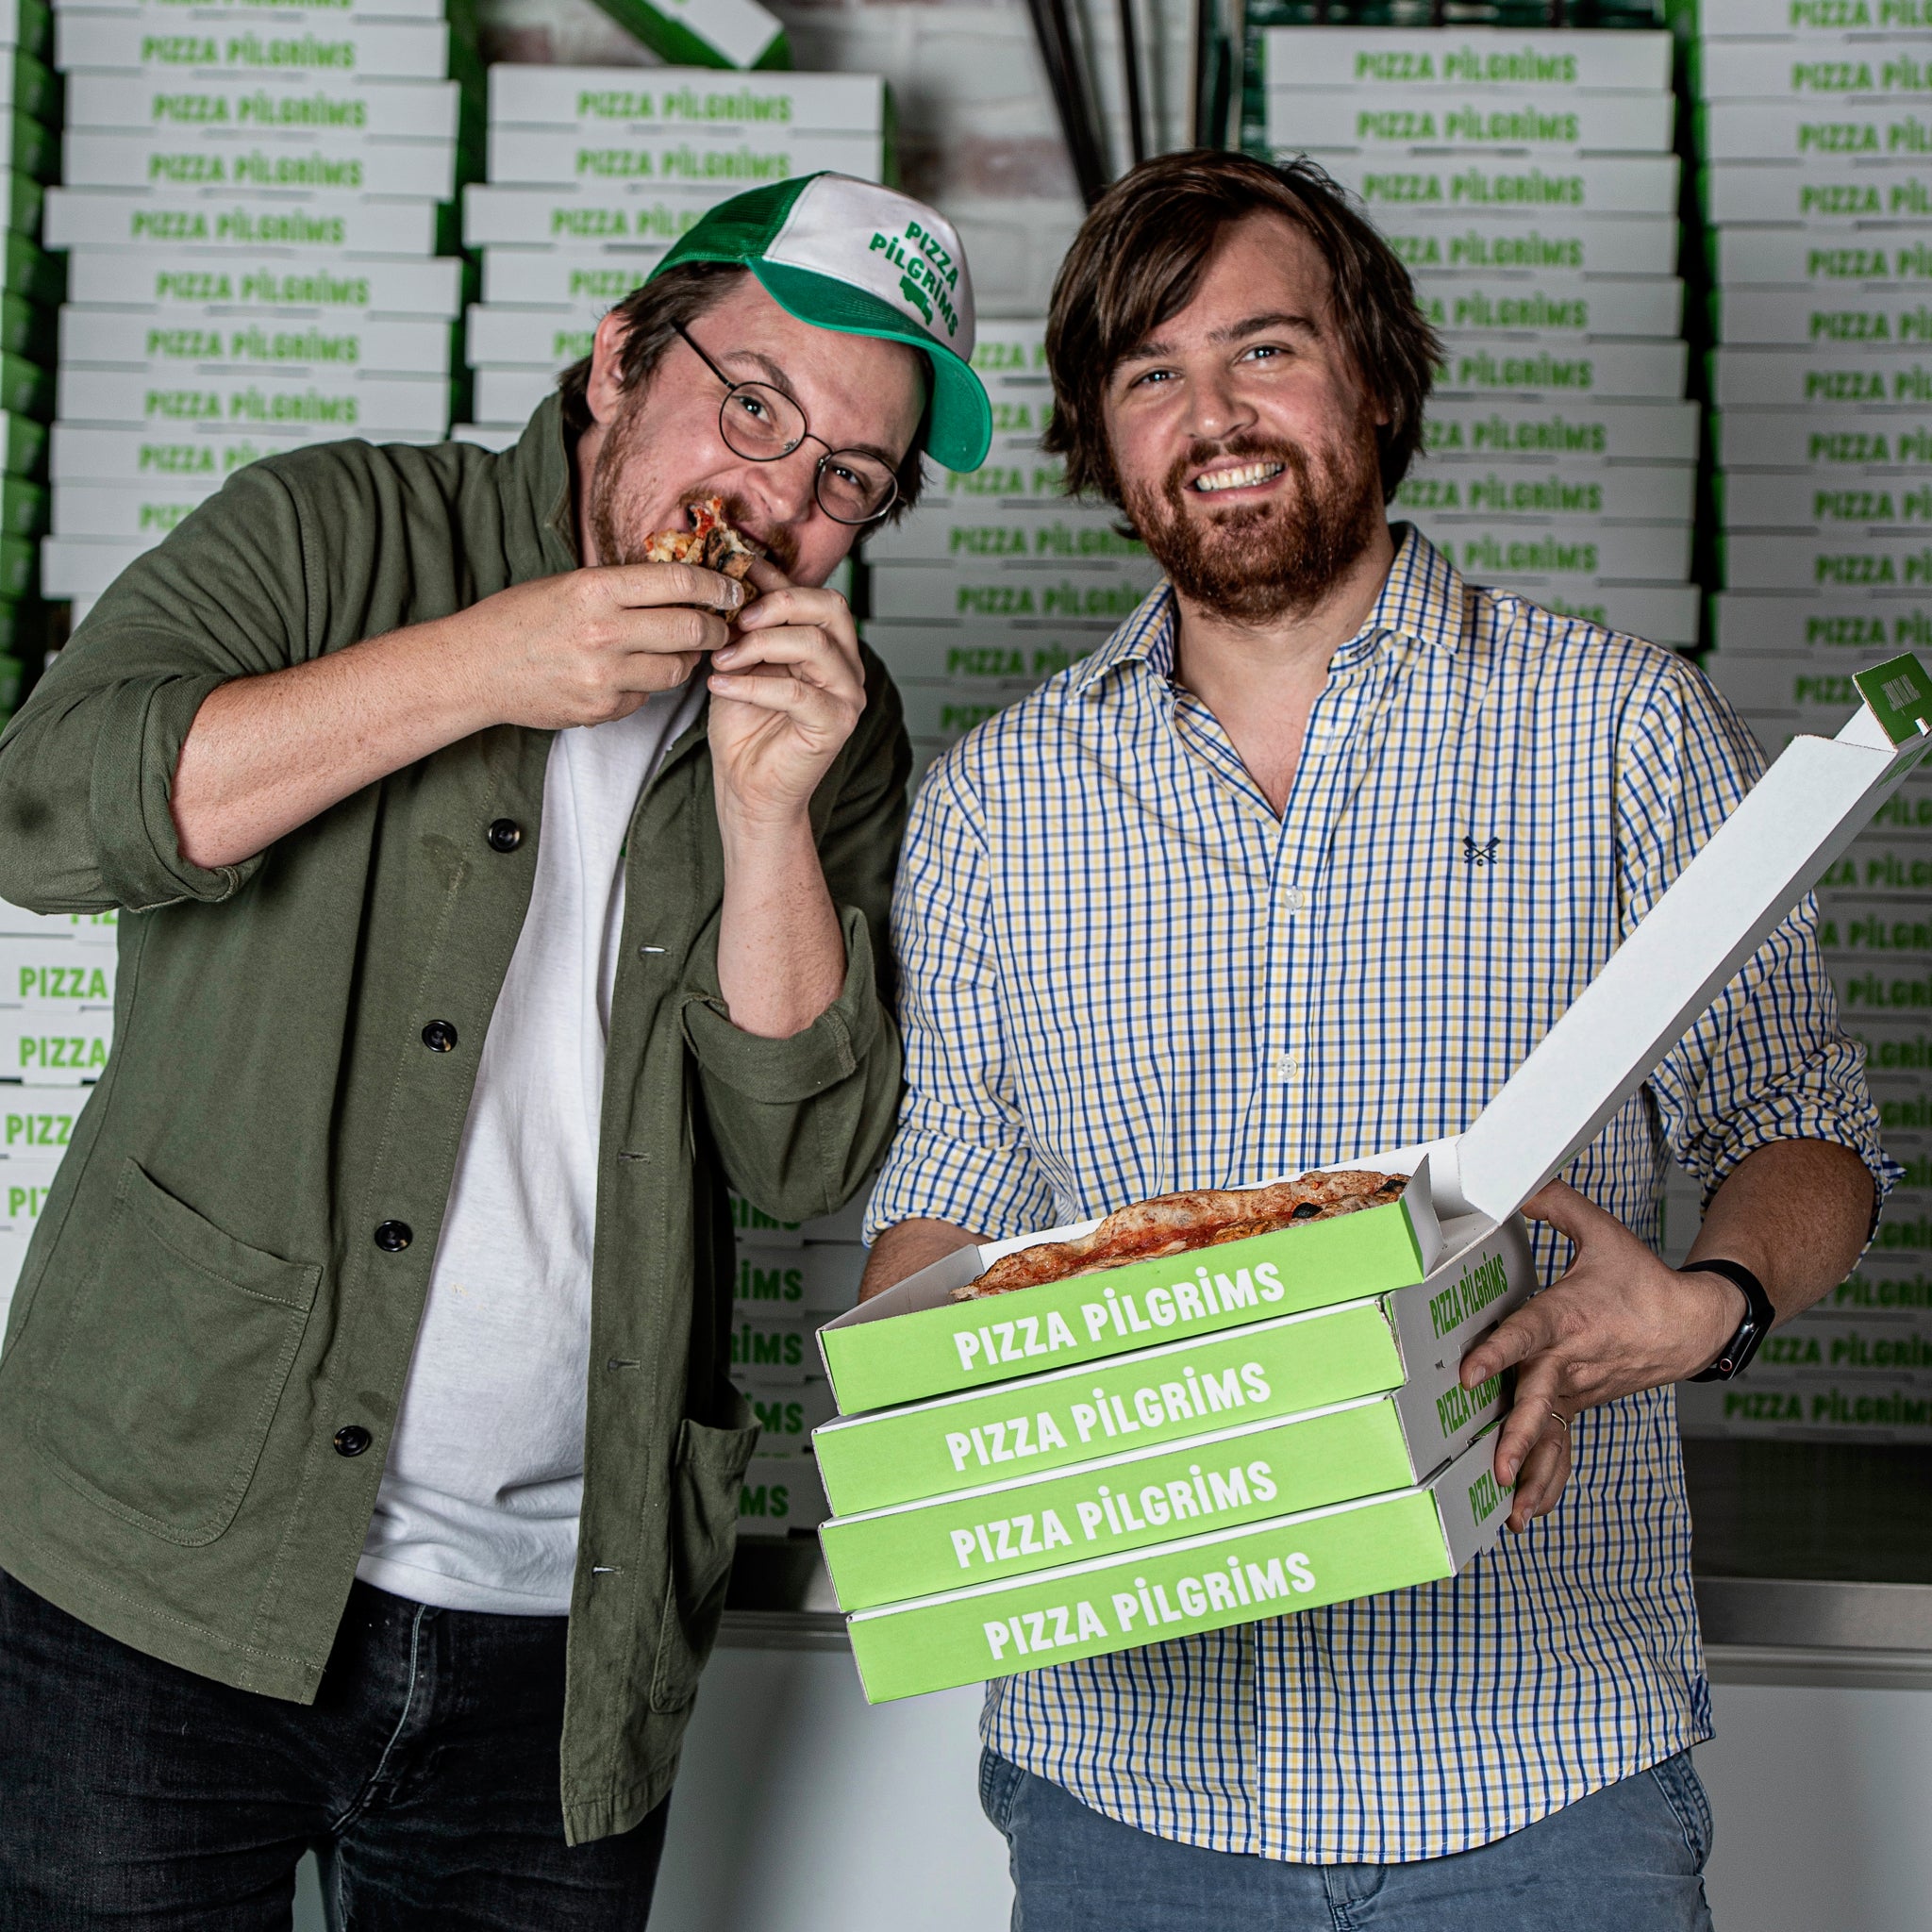 James and Thom Elliot surrounded by countless pizza boxes from Pizza Pilgrims. 